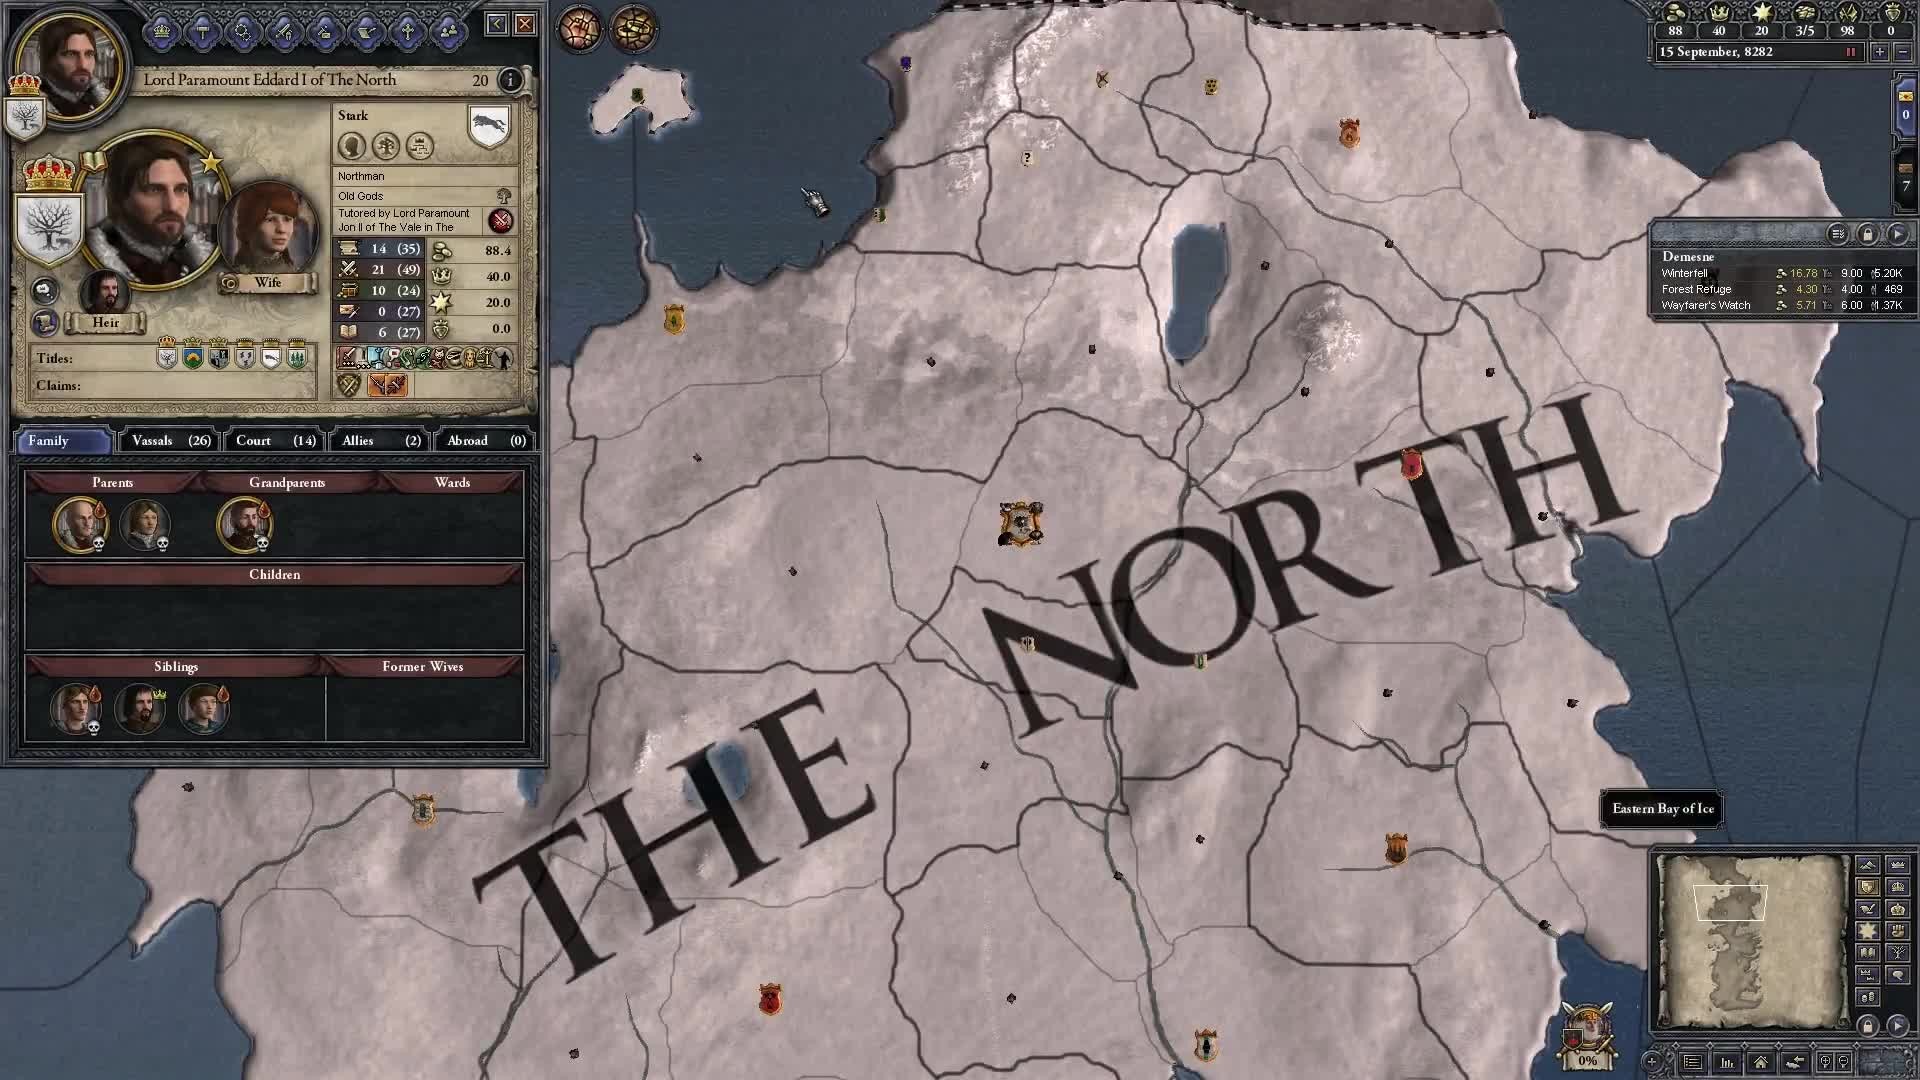 1920x1080 House Stark 'Let's Play' CK2:AGOT by Saithis video - Crusader Kings 2: A  Game of Thrones (CK2:AGOT) mod for Crusader Kings II - Mod DB